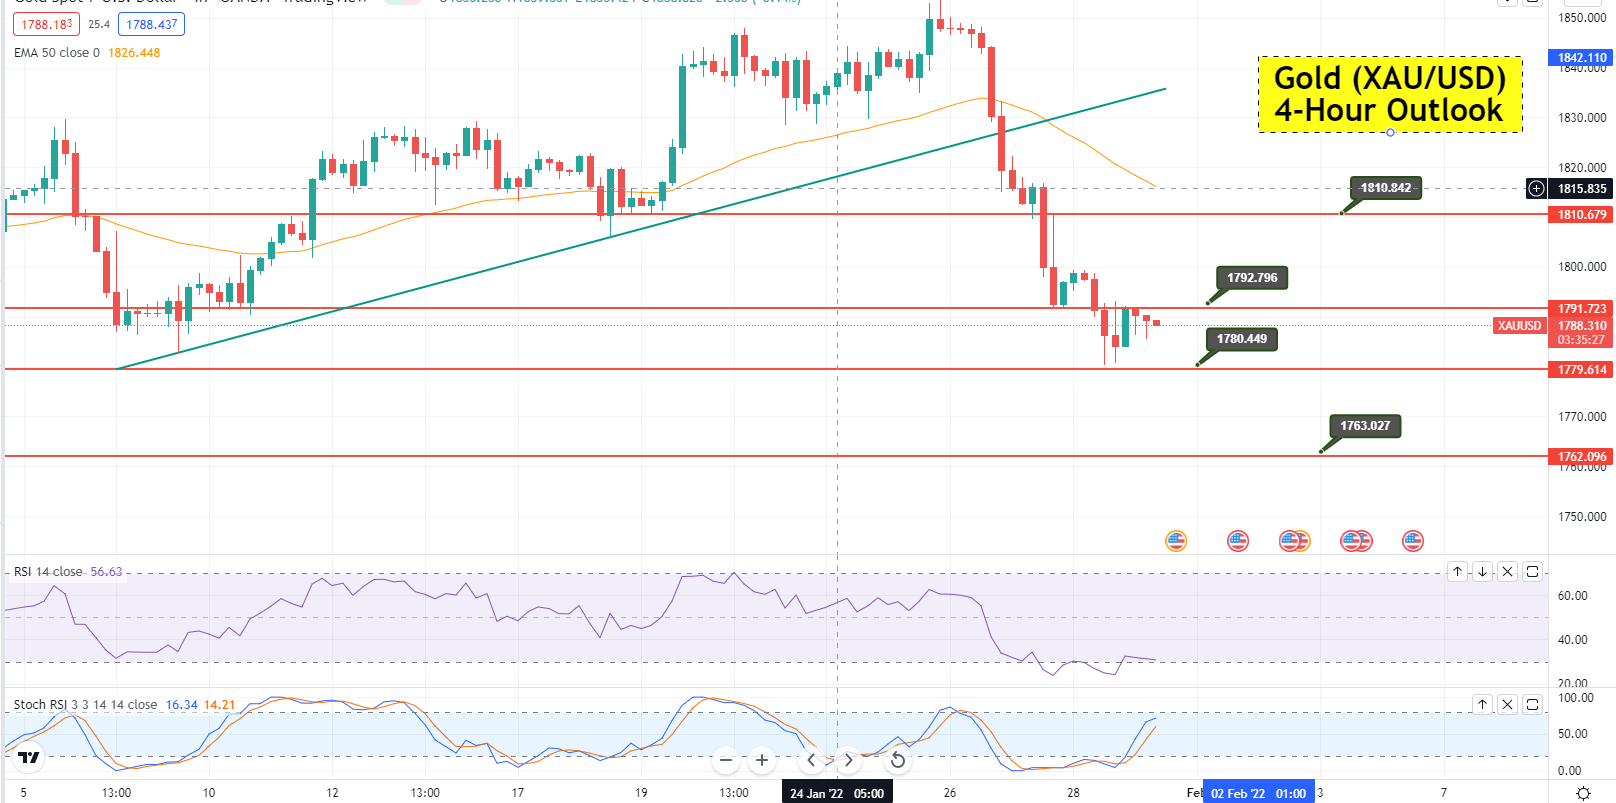 Gold Faces a Hurdle; Why XAU/USD Could Resume the Downtrend